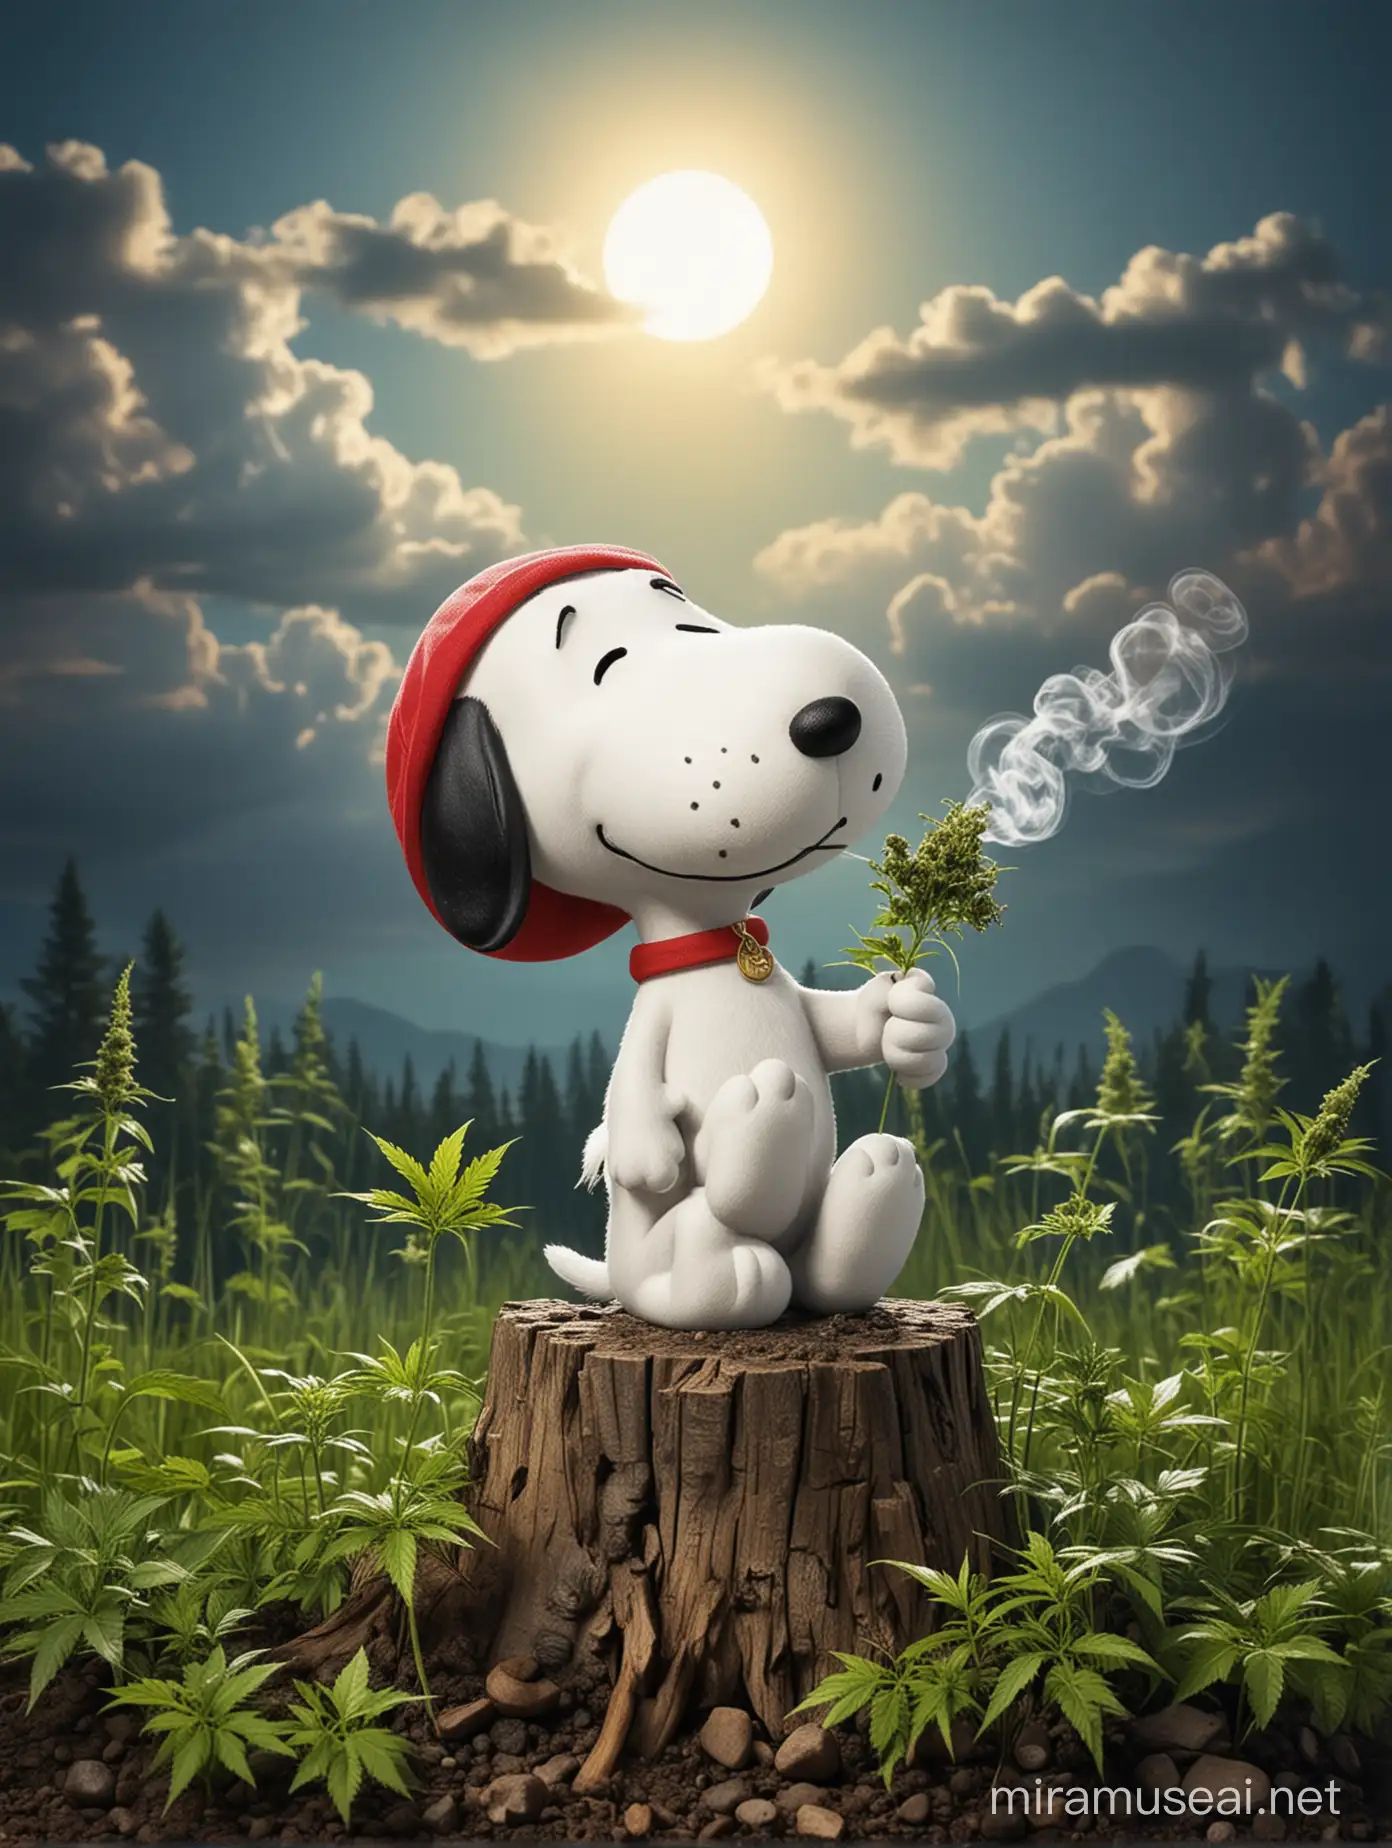 Snoopy Enjoying a Relaxing Moment Amidst Colorful Cannabis Plants